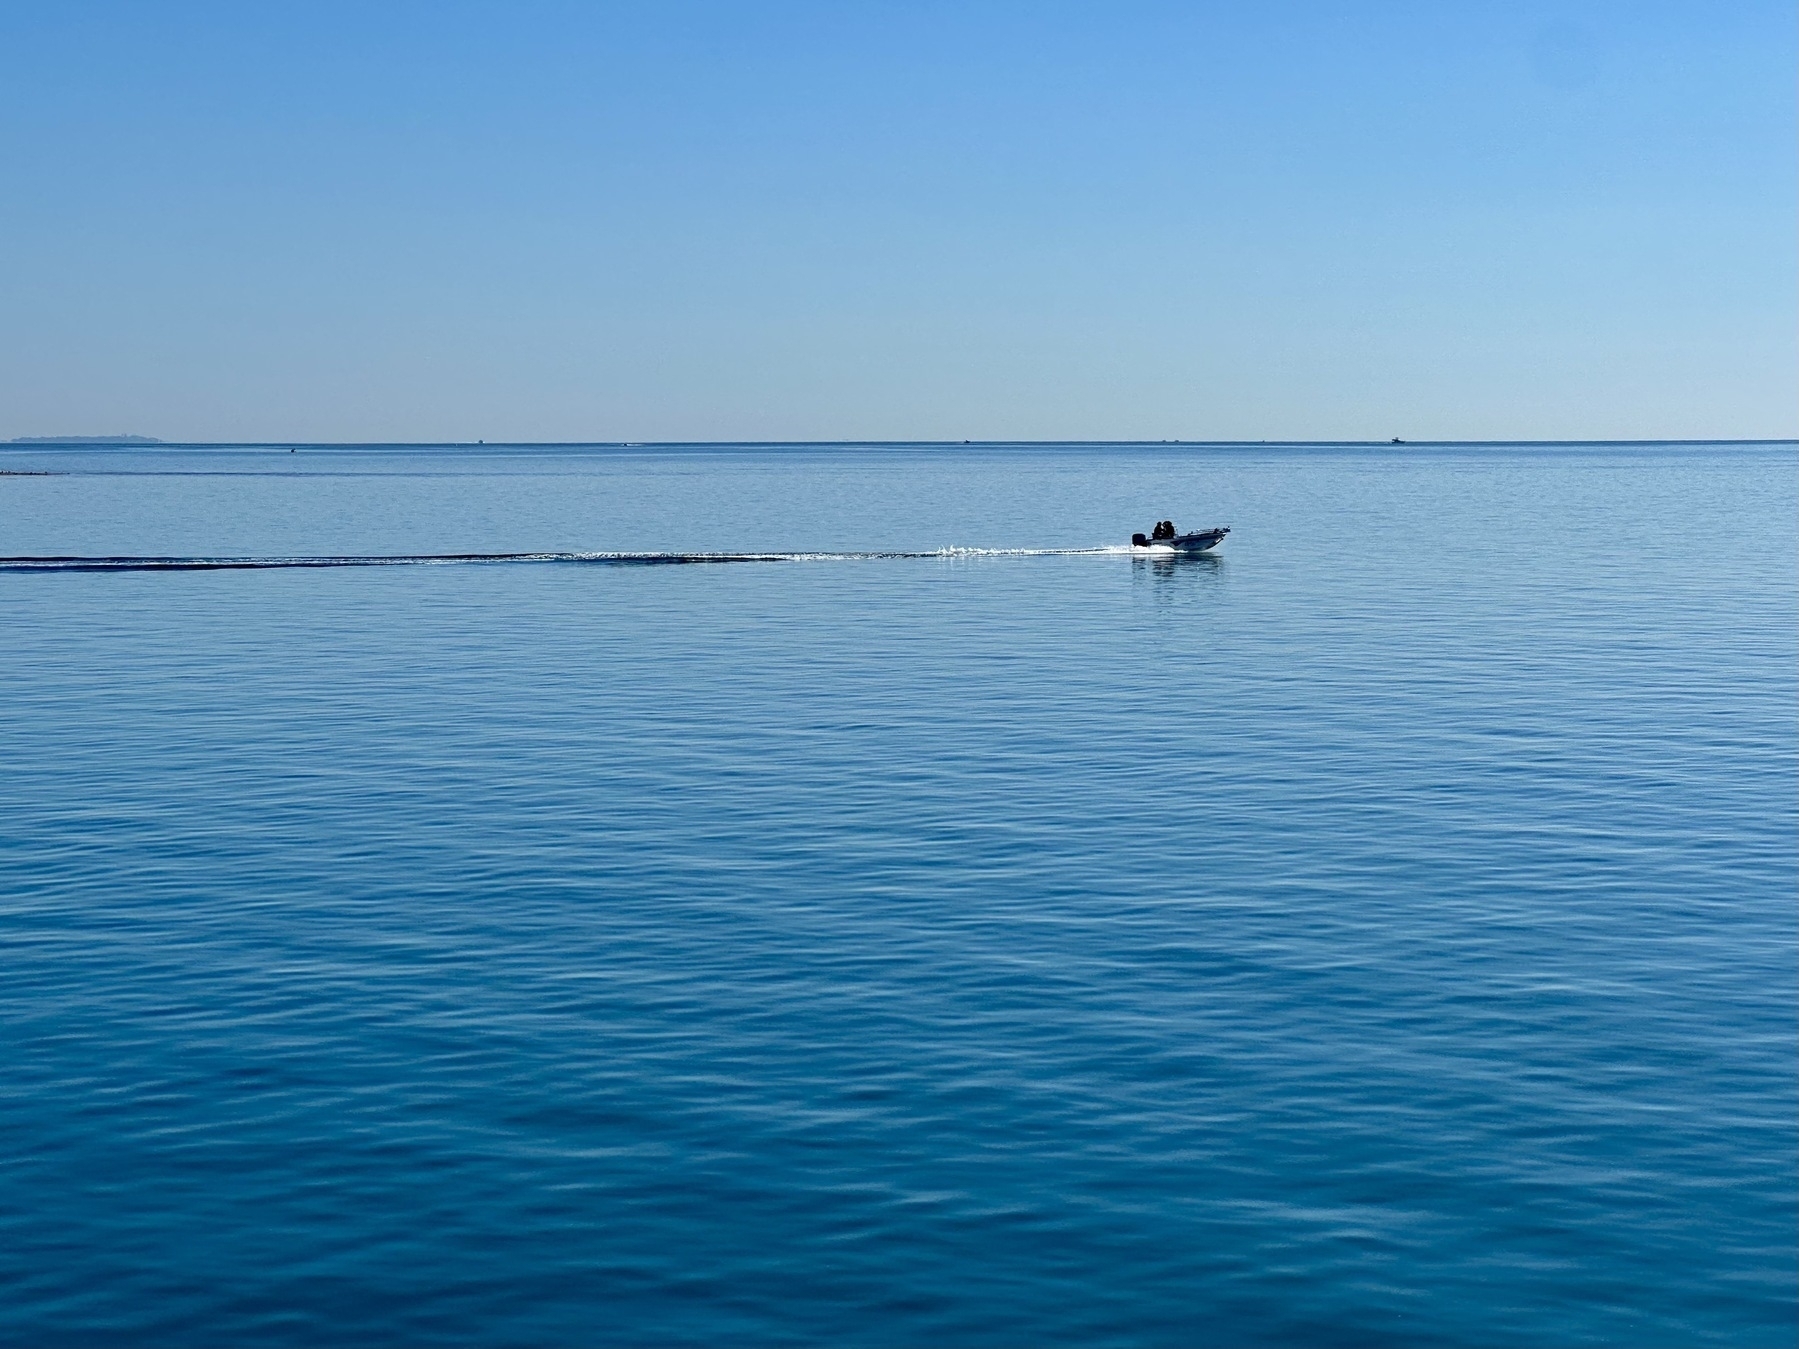 A small tinny zipping out into Moreton Bay for a spot of fishing. Clear blue skies above almost glassy ocean conditions.